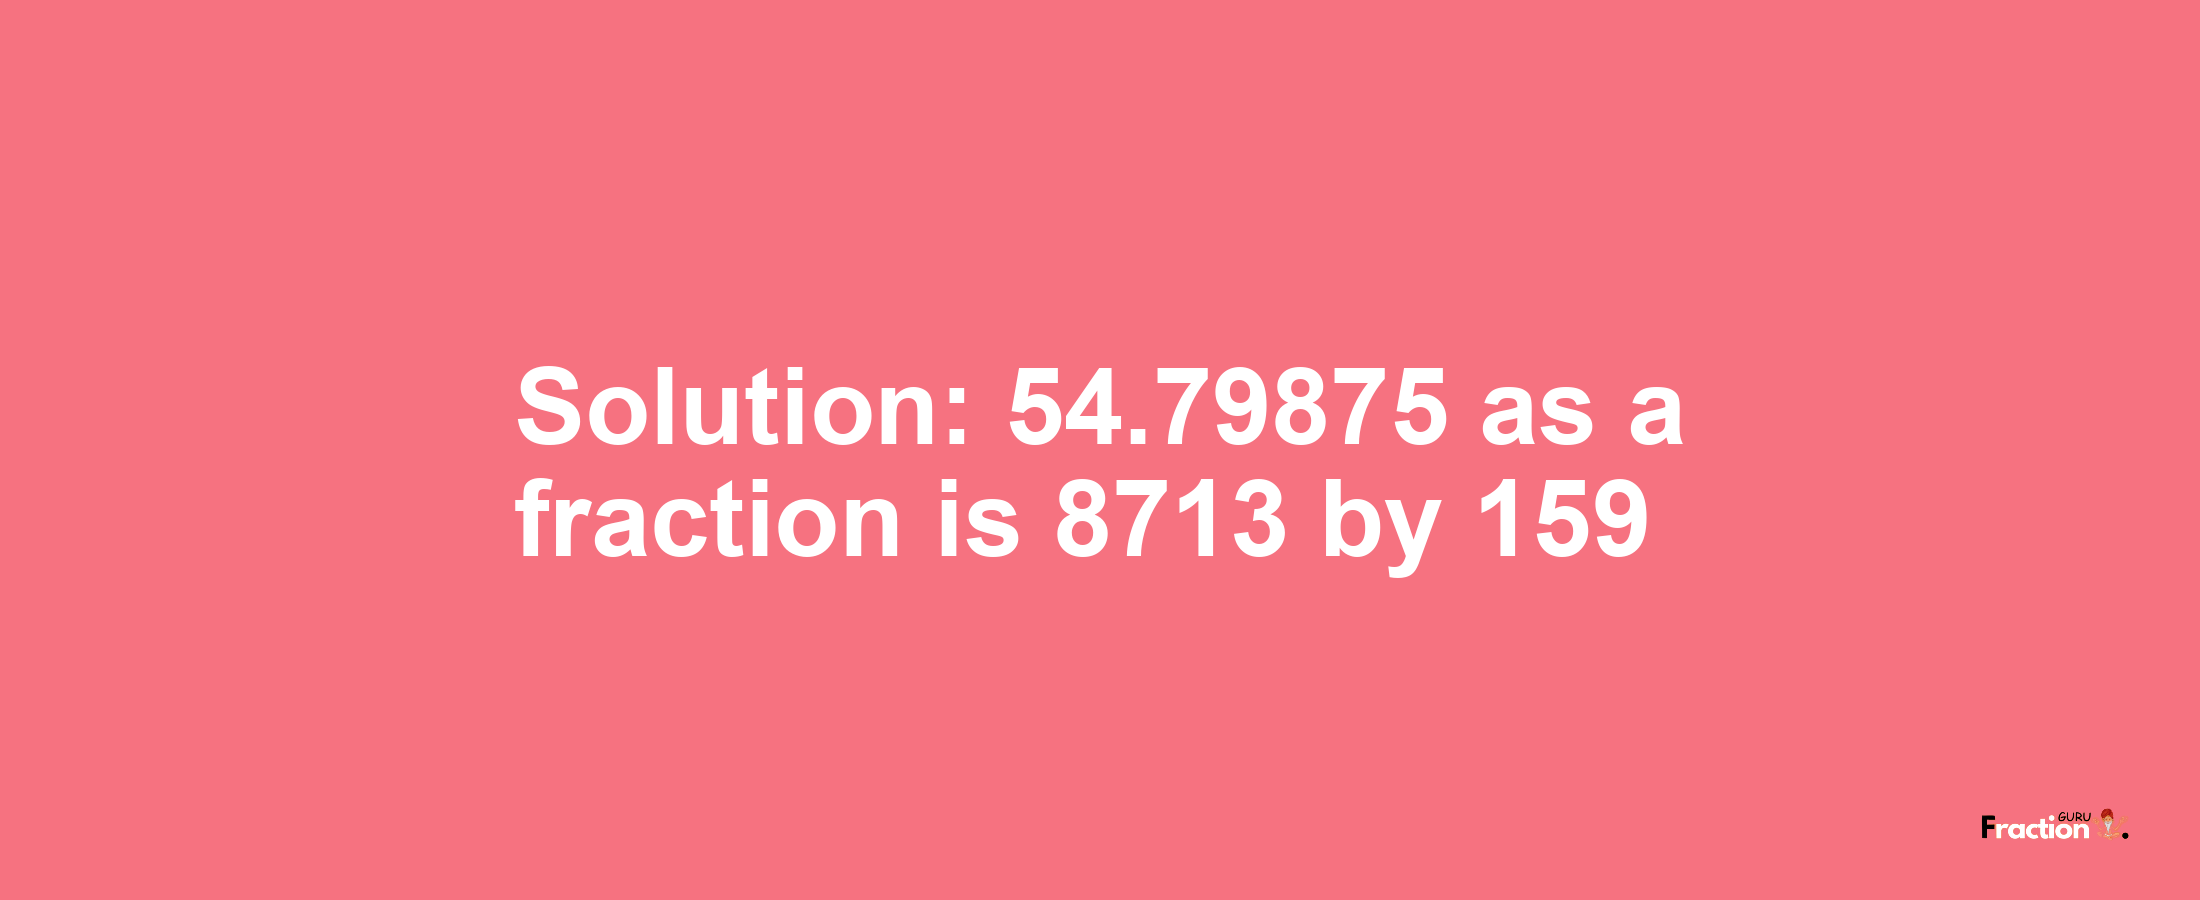 Solution:54.79875 as a fraction is 8713/159